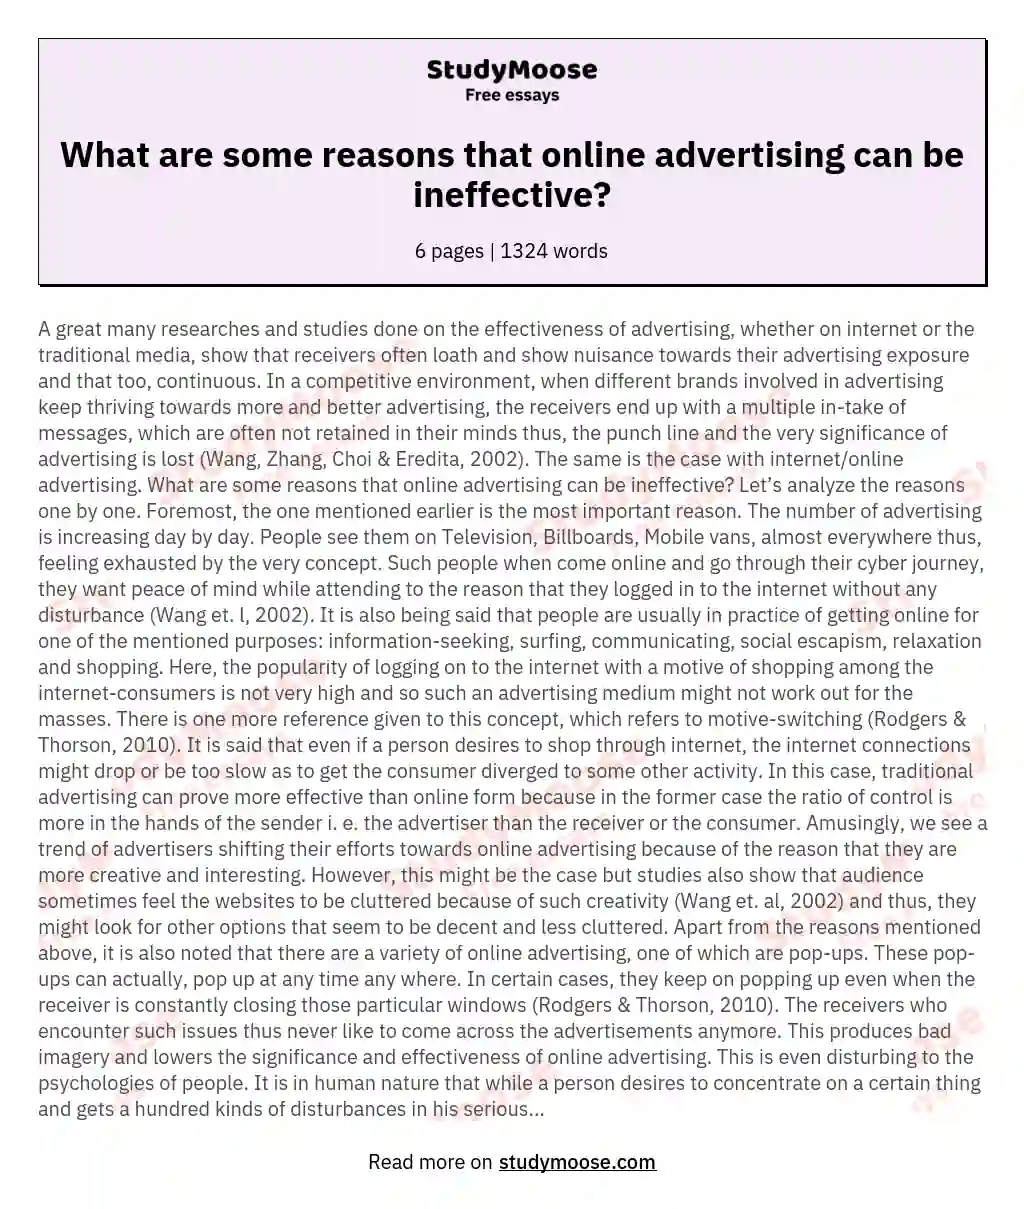 What are some reasons that online advertising can be ineffective?